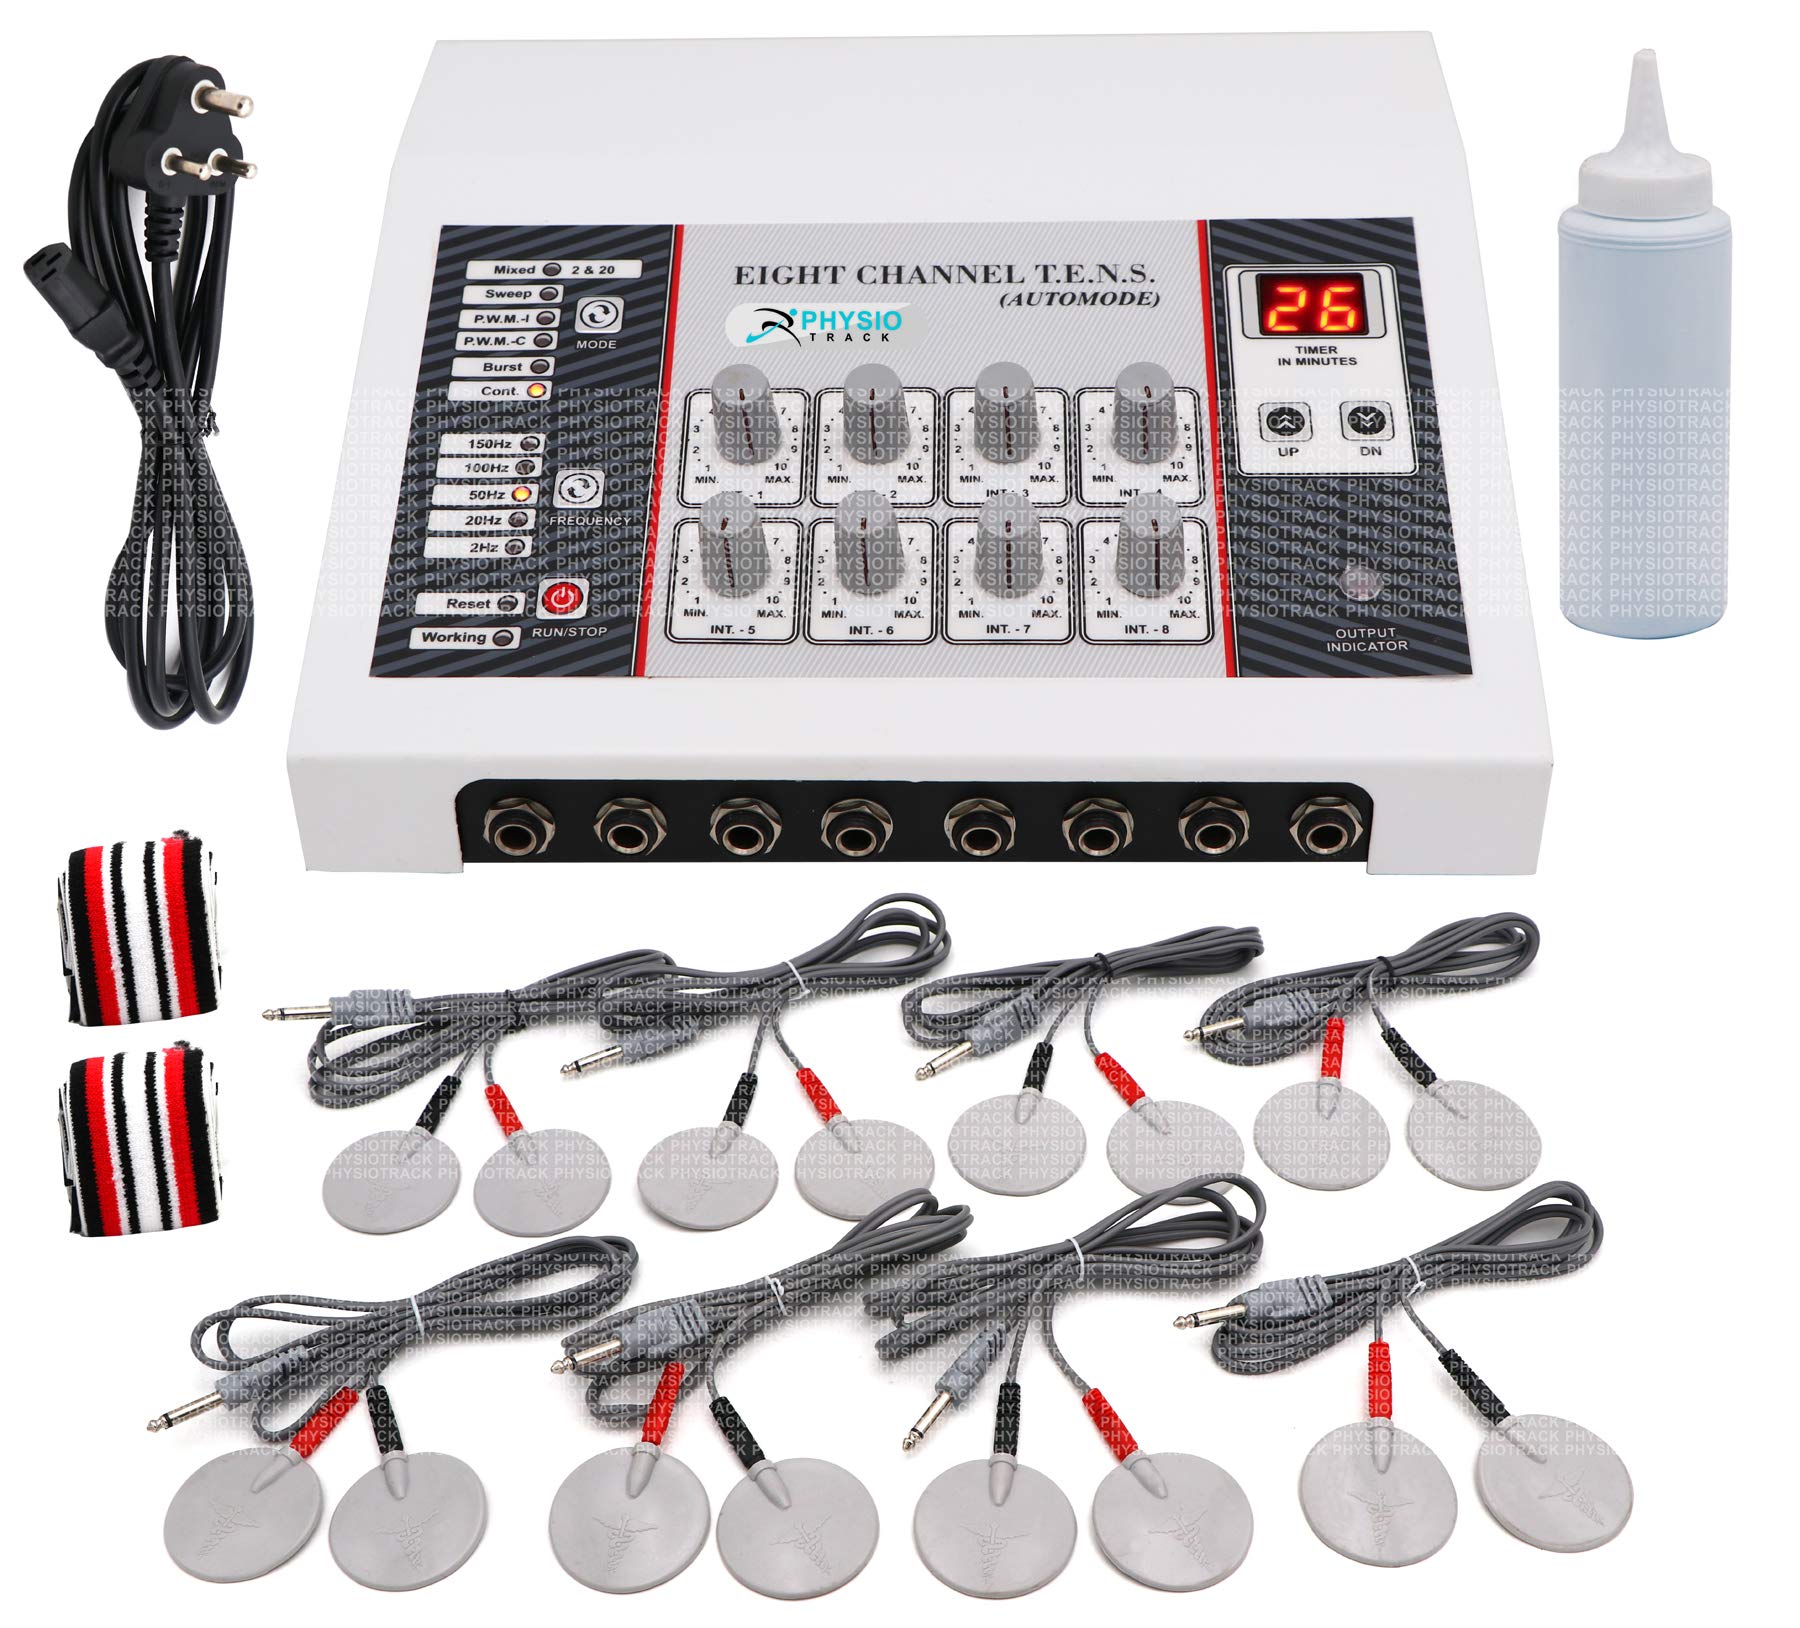 Physiotrack Tens Machine 8 Channel Auto Mode for Physiotherapy Equipments Physiotherapy Machine Nerve Stimulator